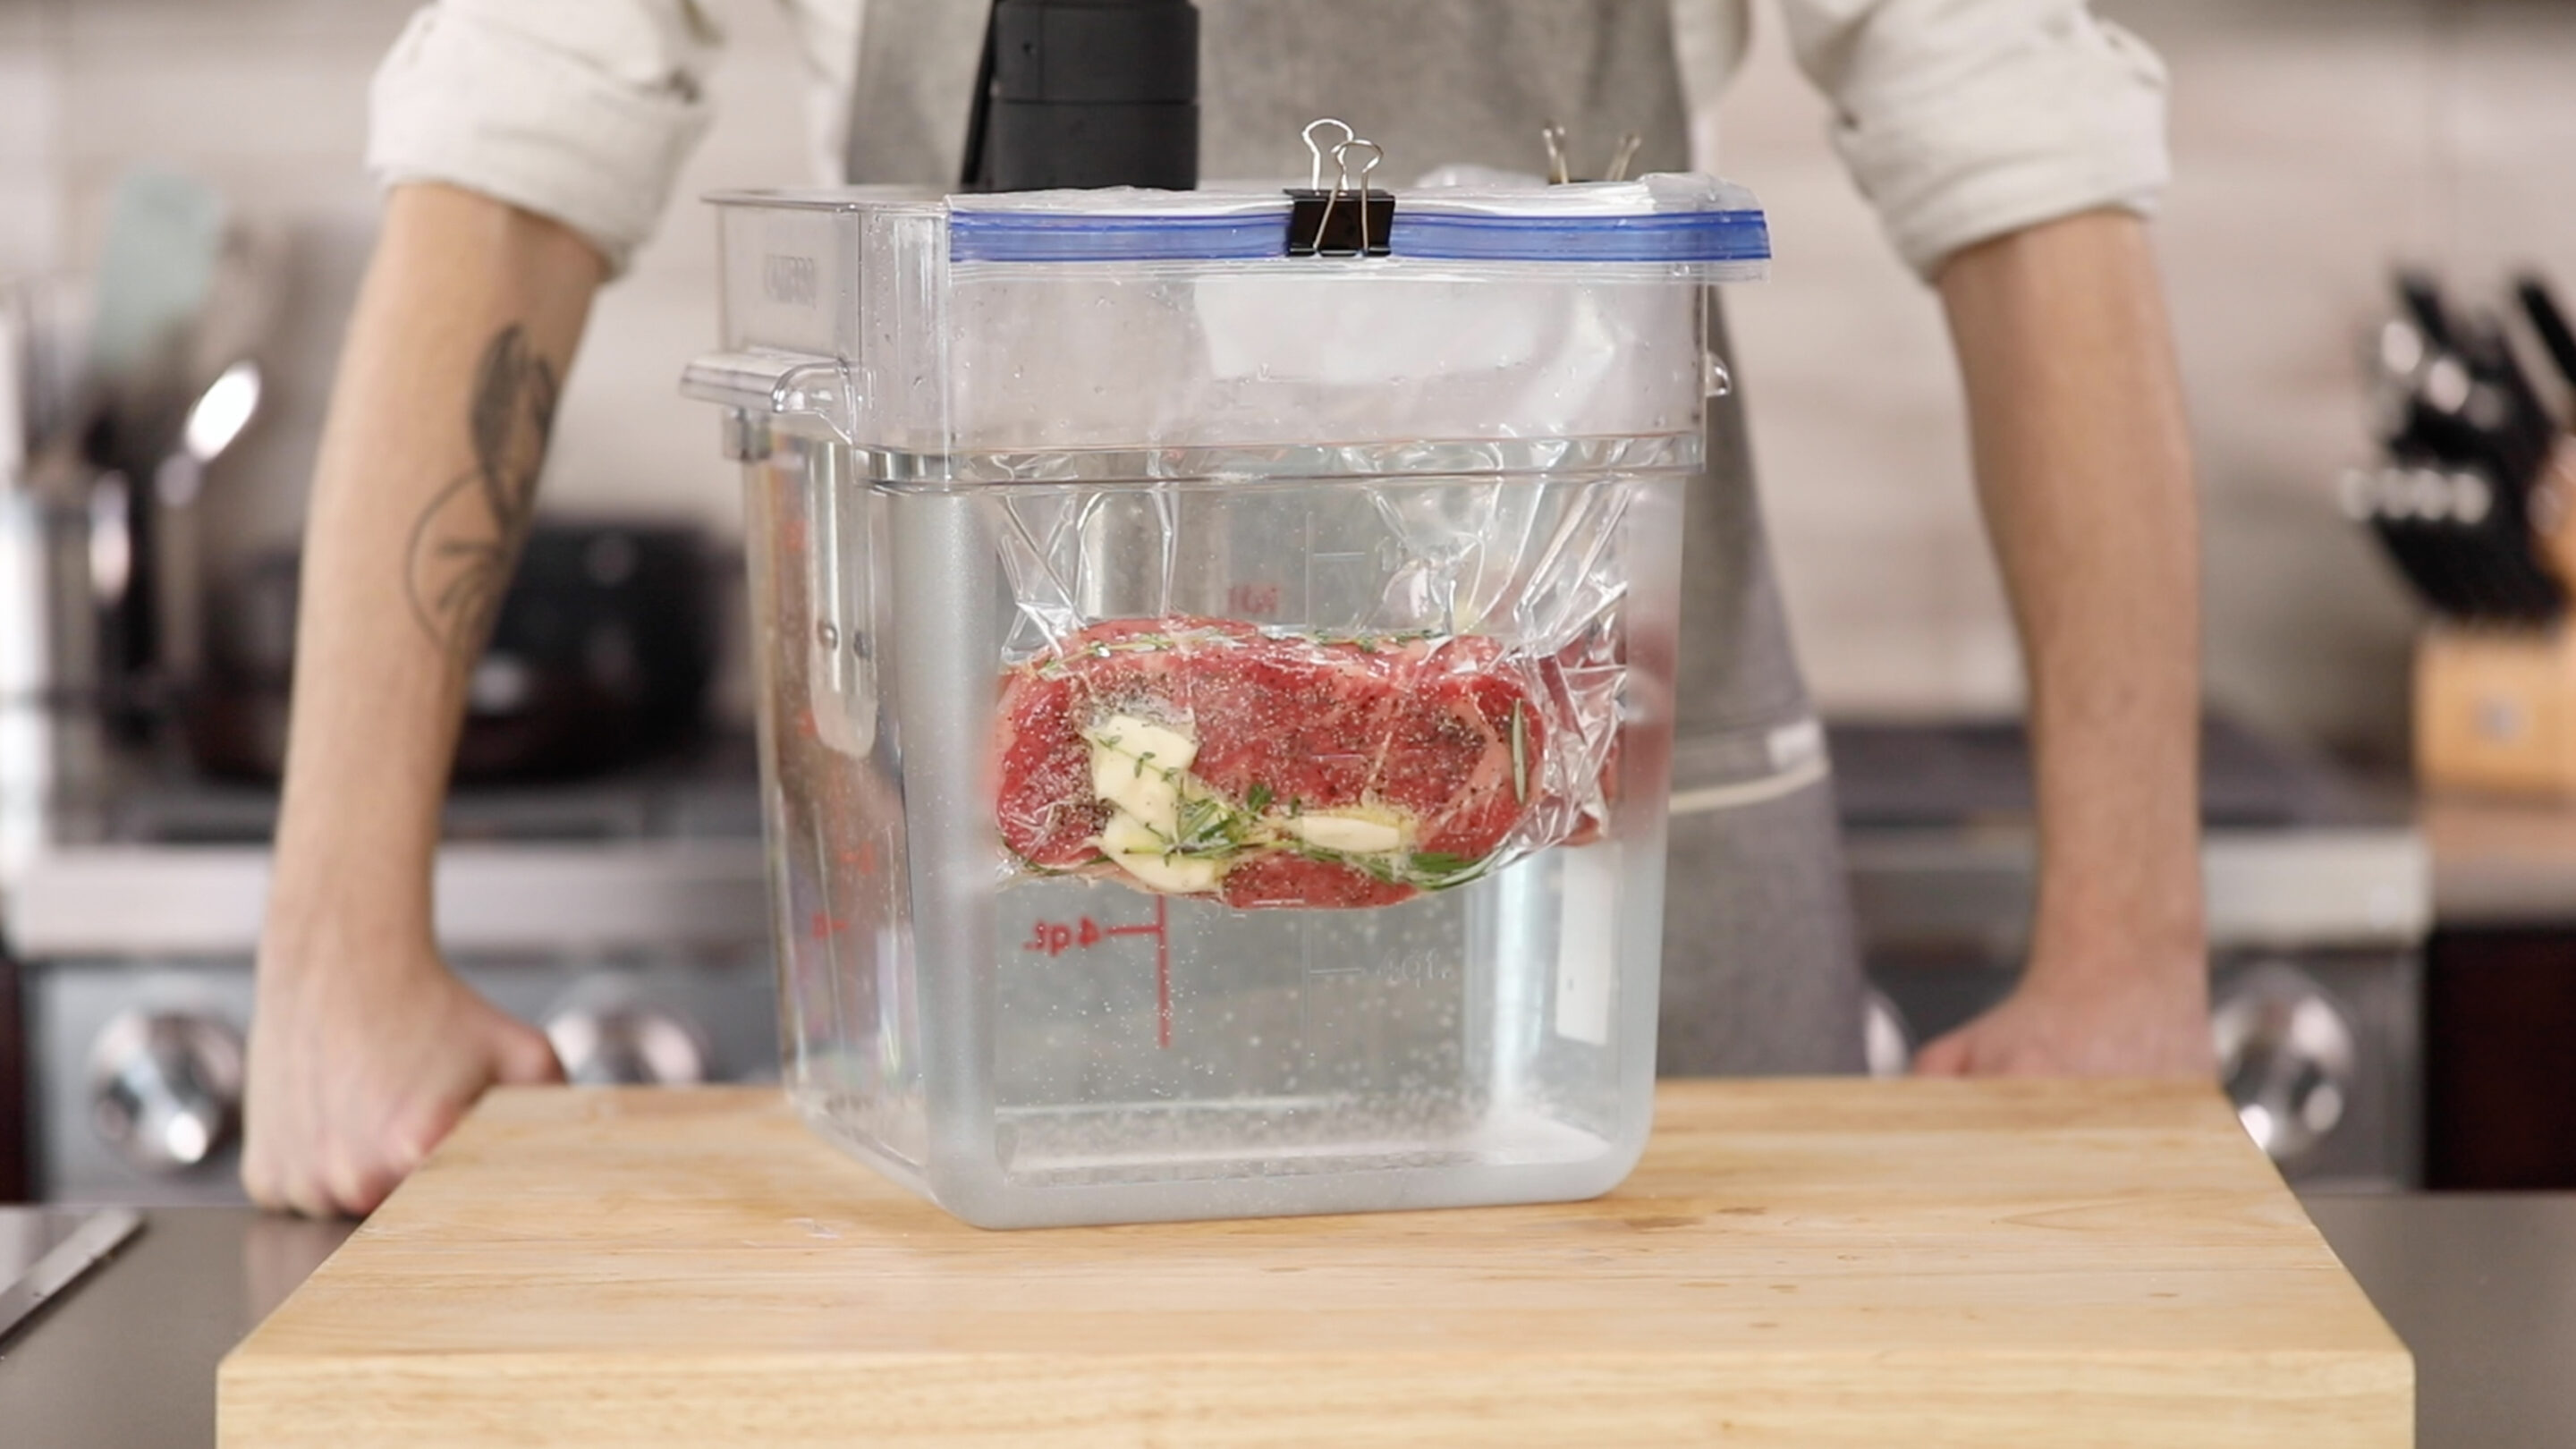 How to cook sous-vide at home step by step